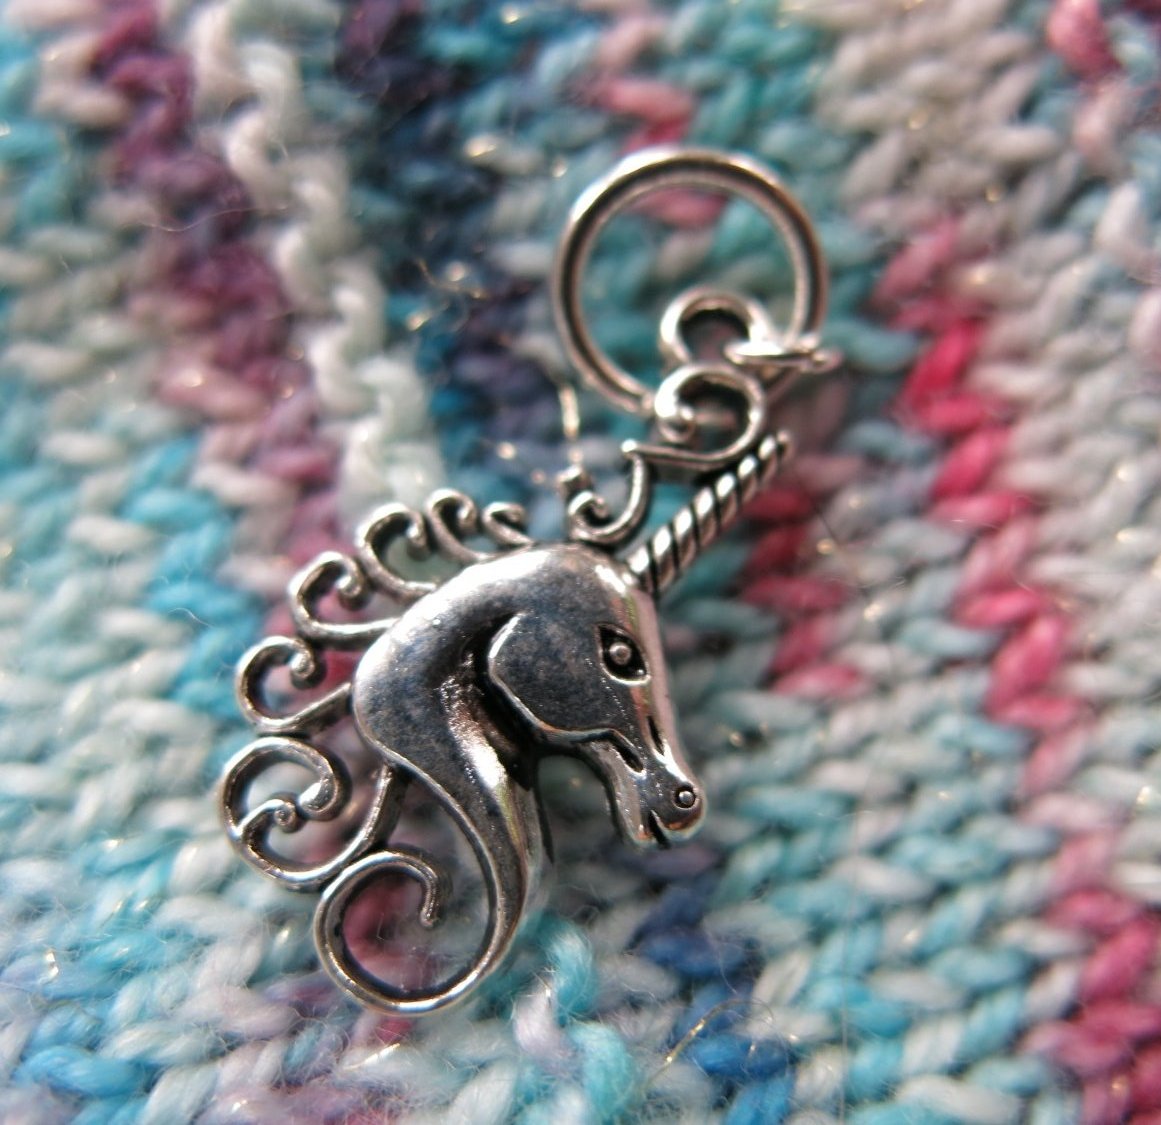 silver snagless unicorn stitch marker for knitting projects